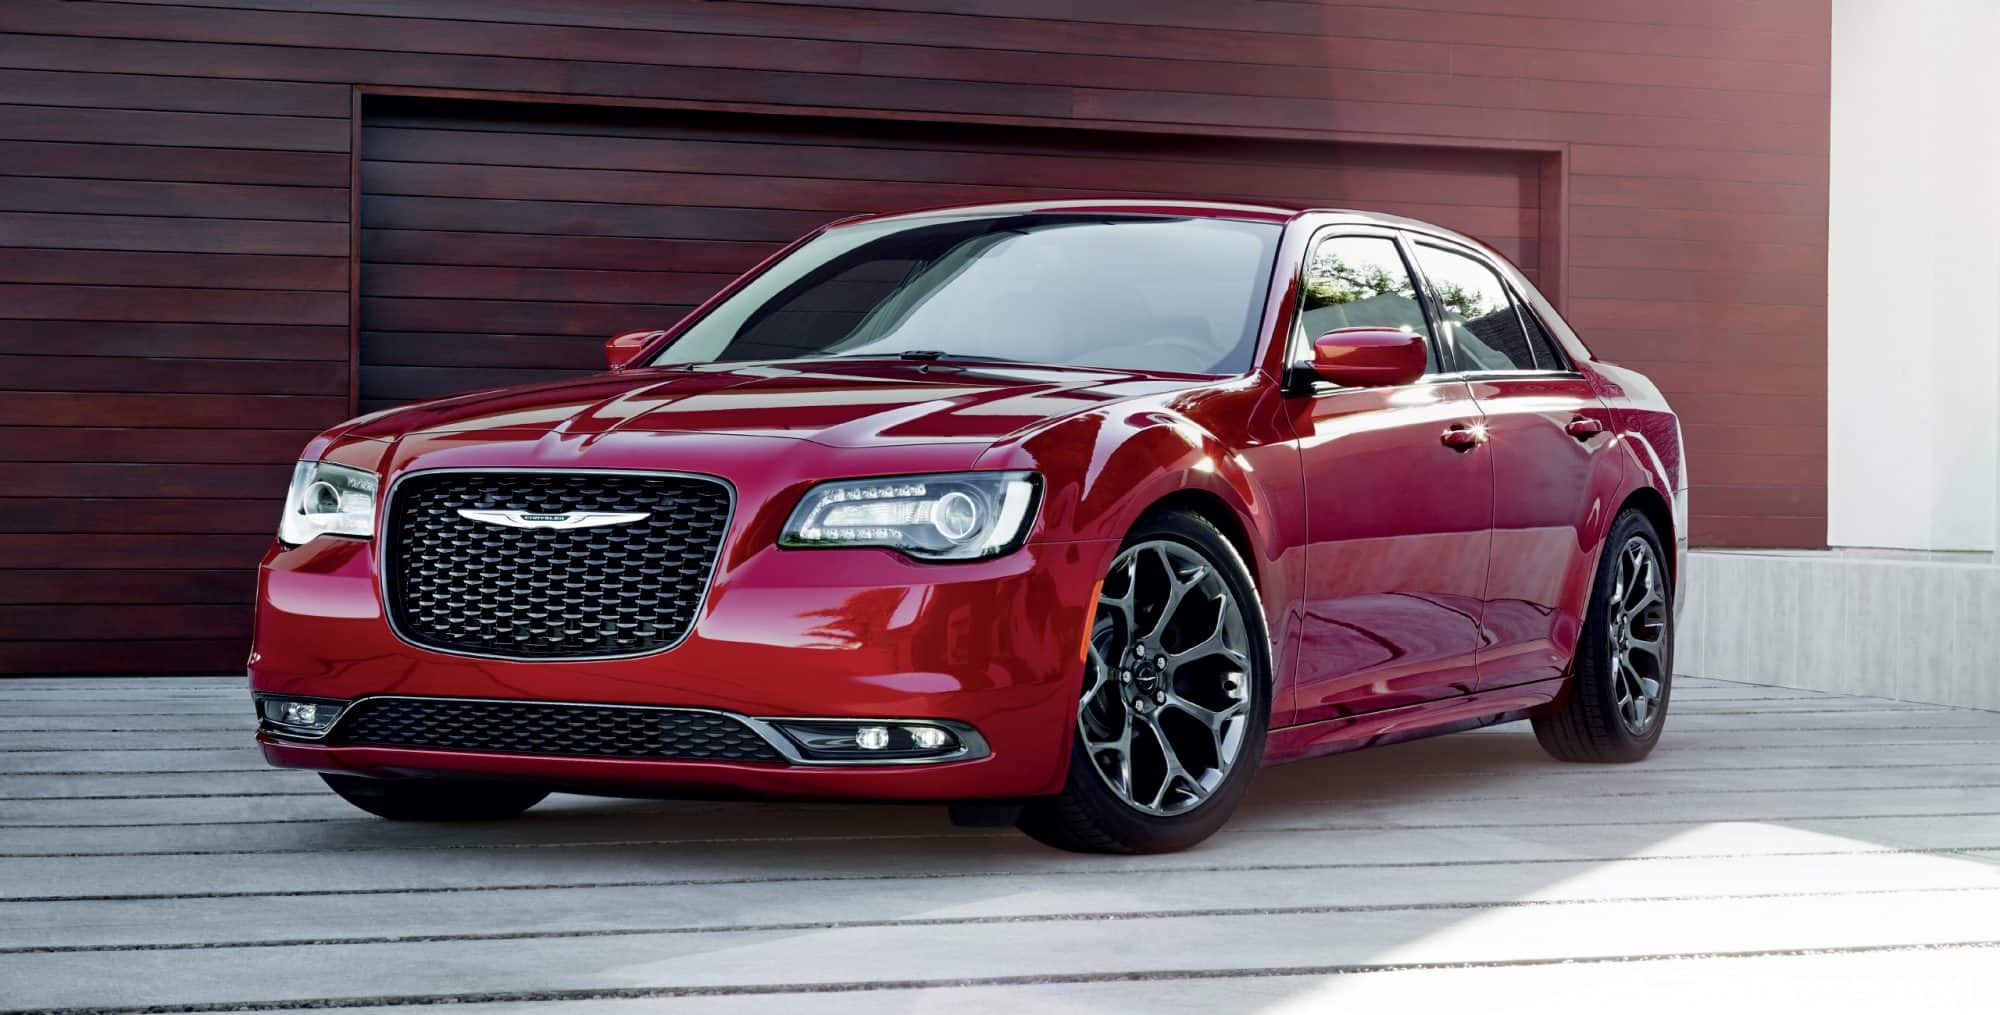 Red 2018 Chrysler 300 on driveway